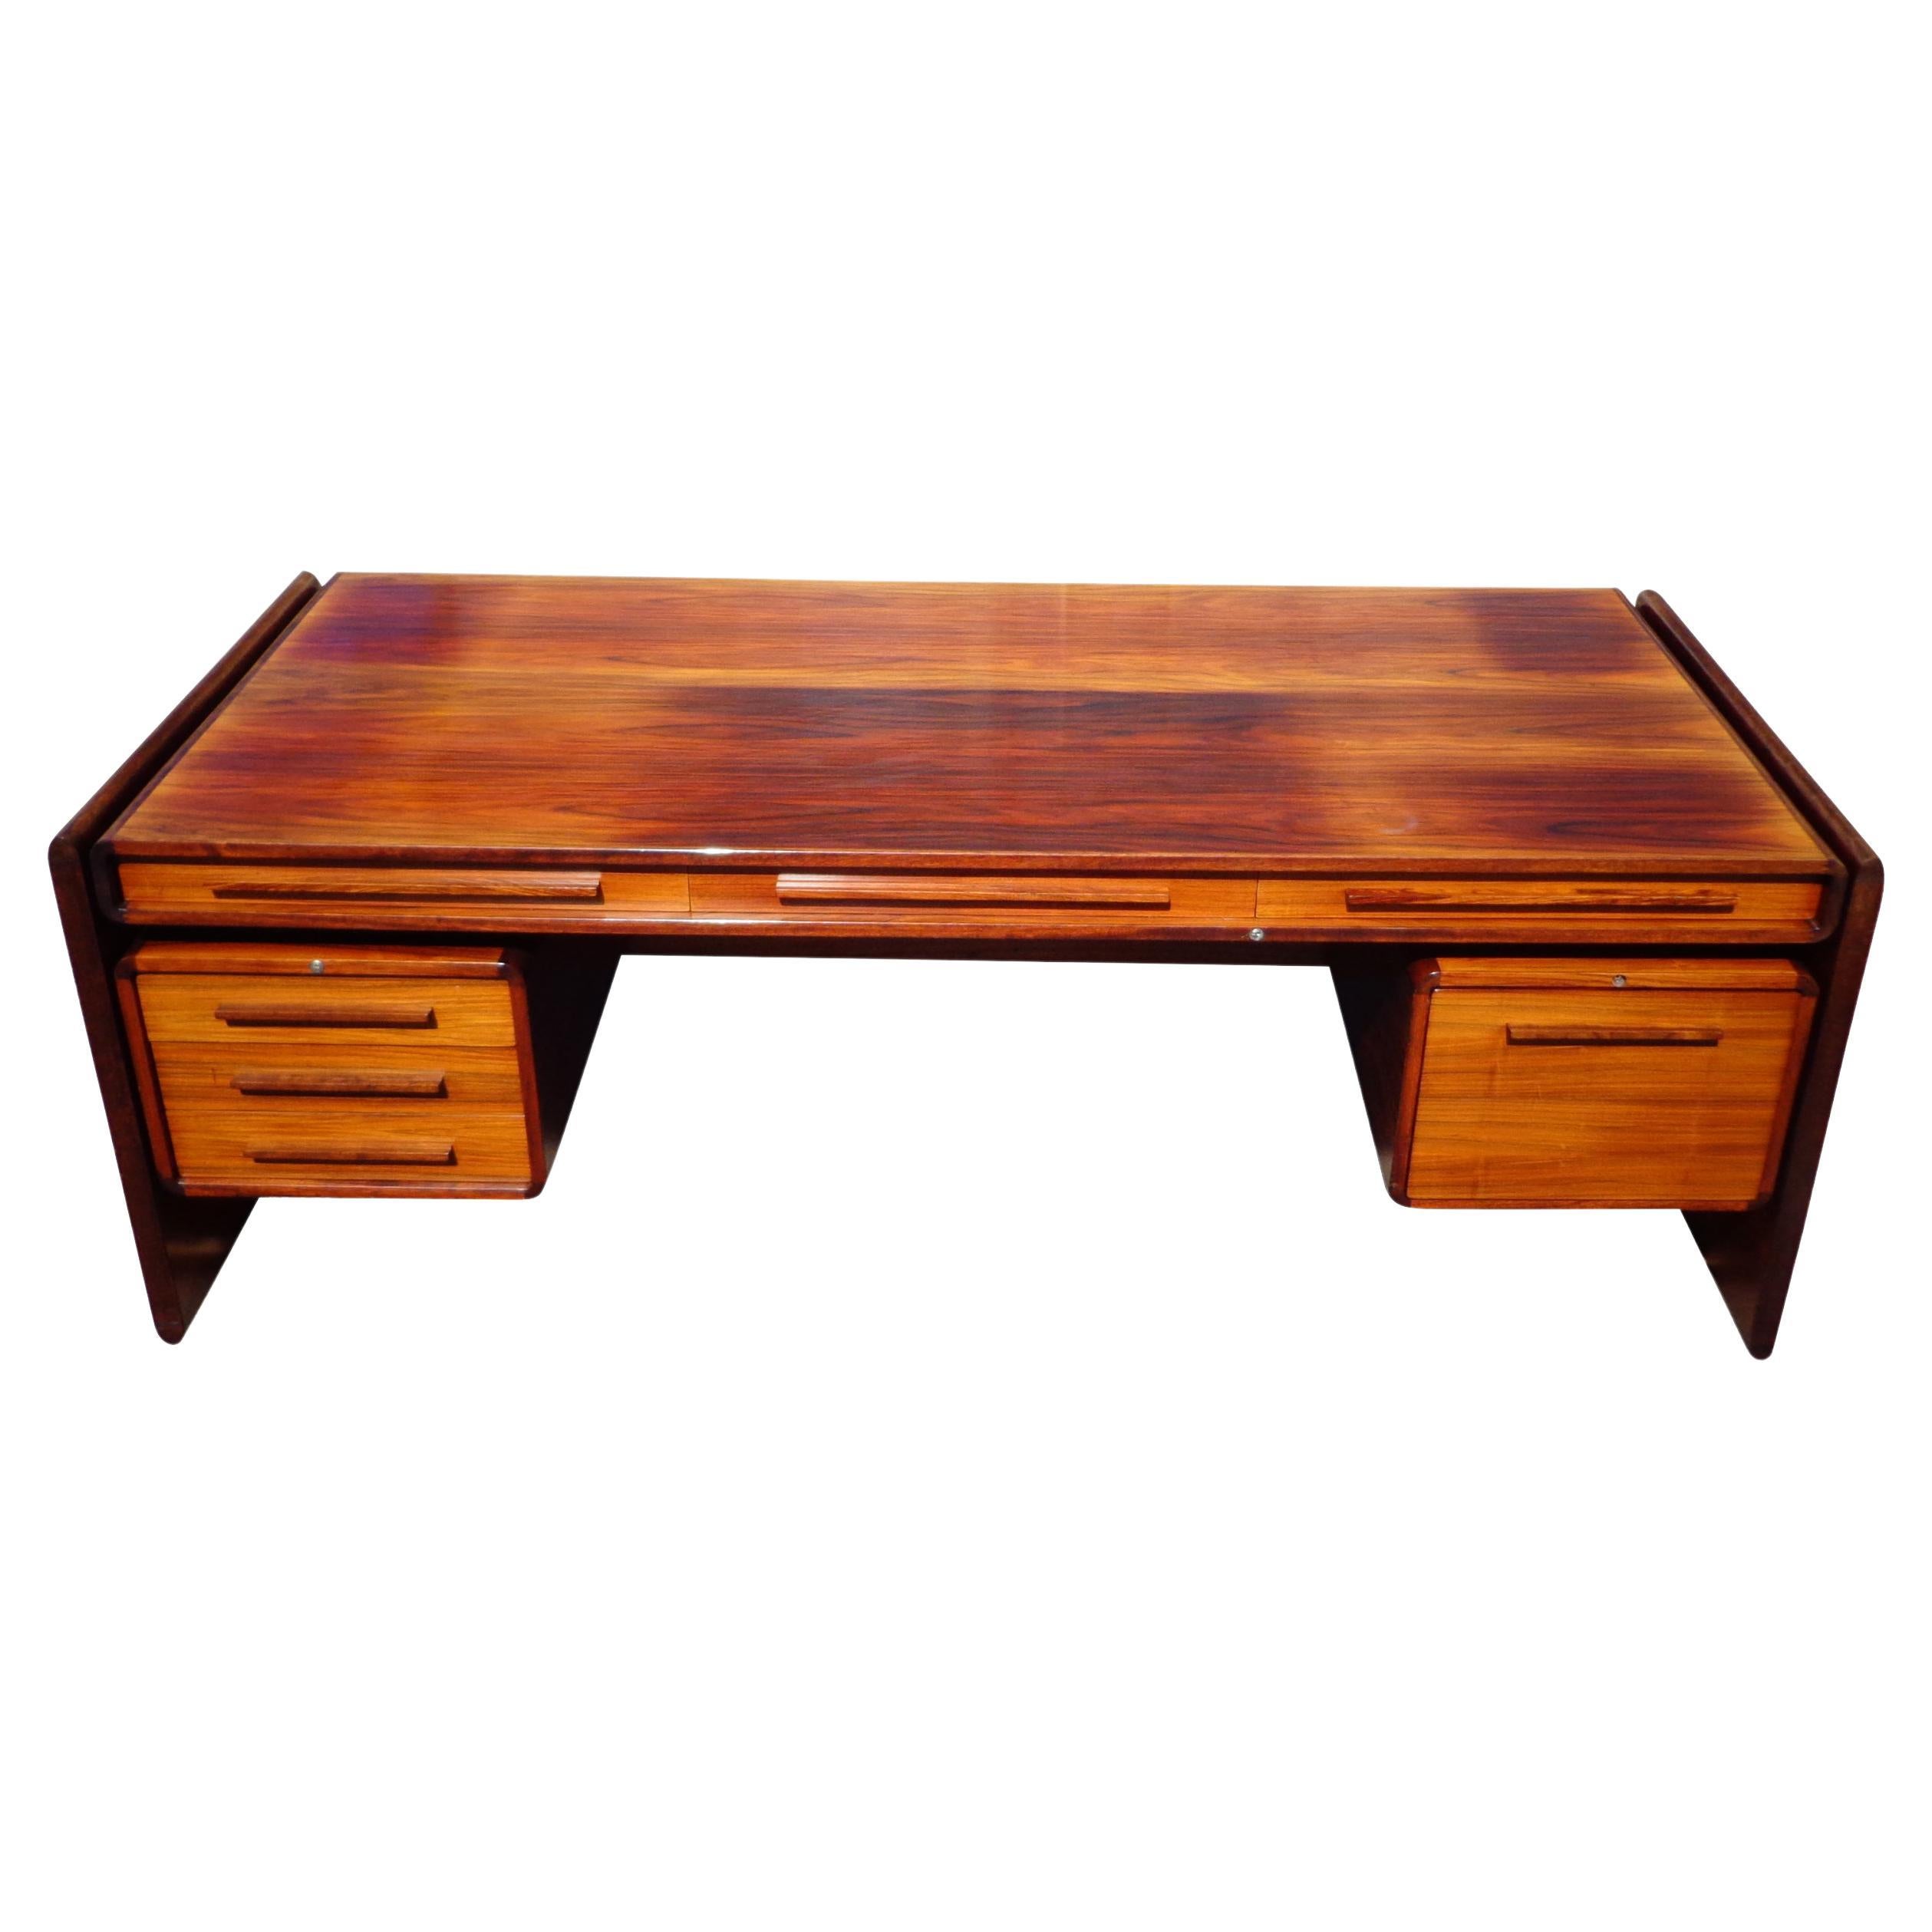 Rosewood desk from Svend Dyrlund 1970s.

A Mid-Century Modern Santos rosewood desk with panel legs and horizontal wood pulls made by Dyrlund in Denmark. Seven drawers including file storage. 
Finished back.

 Good vintage condition with age on